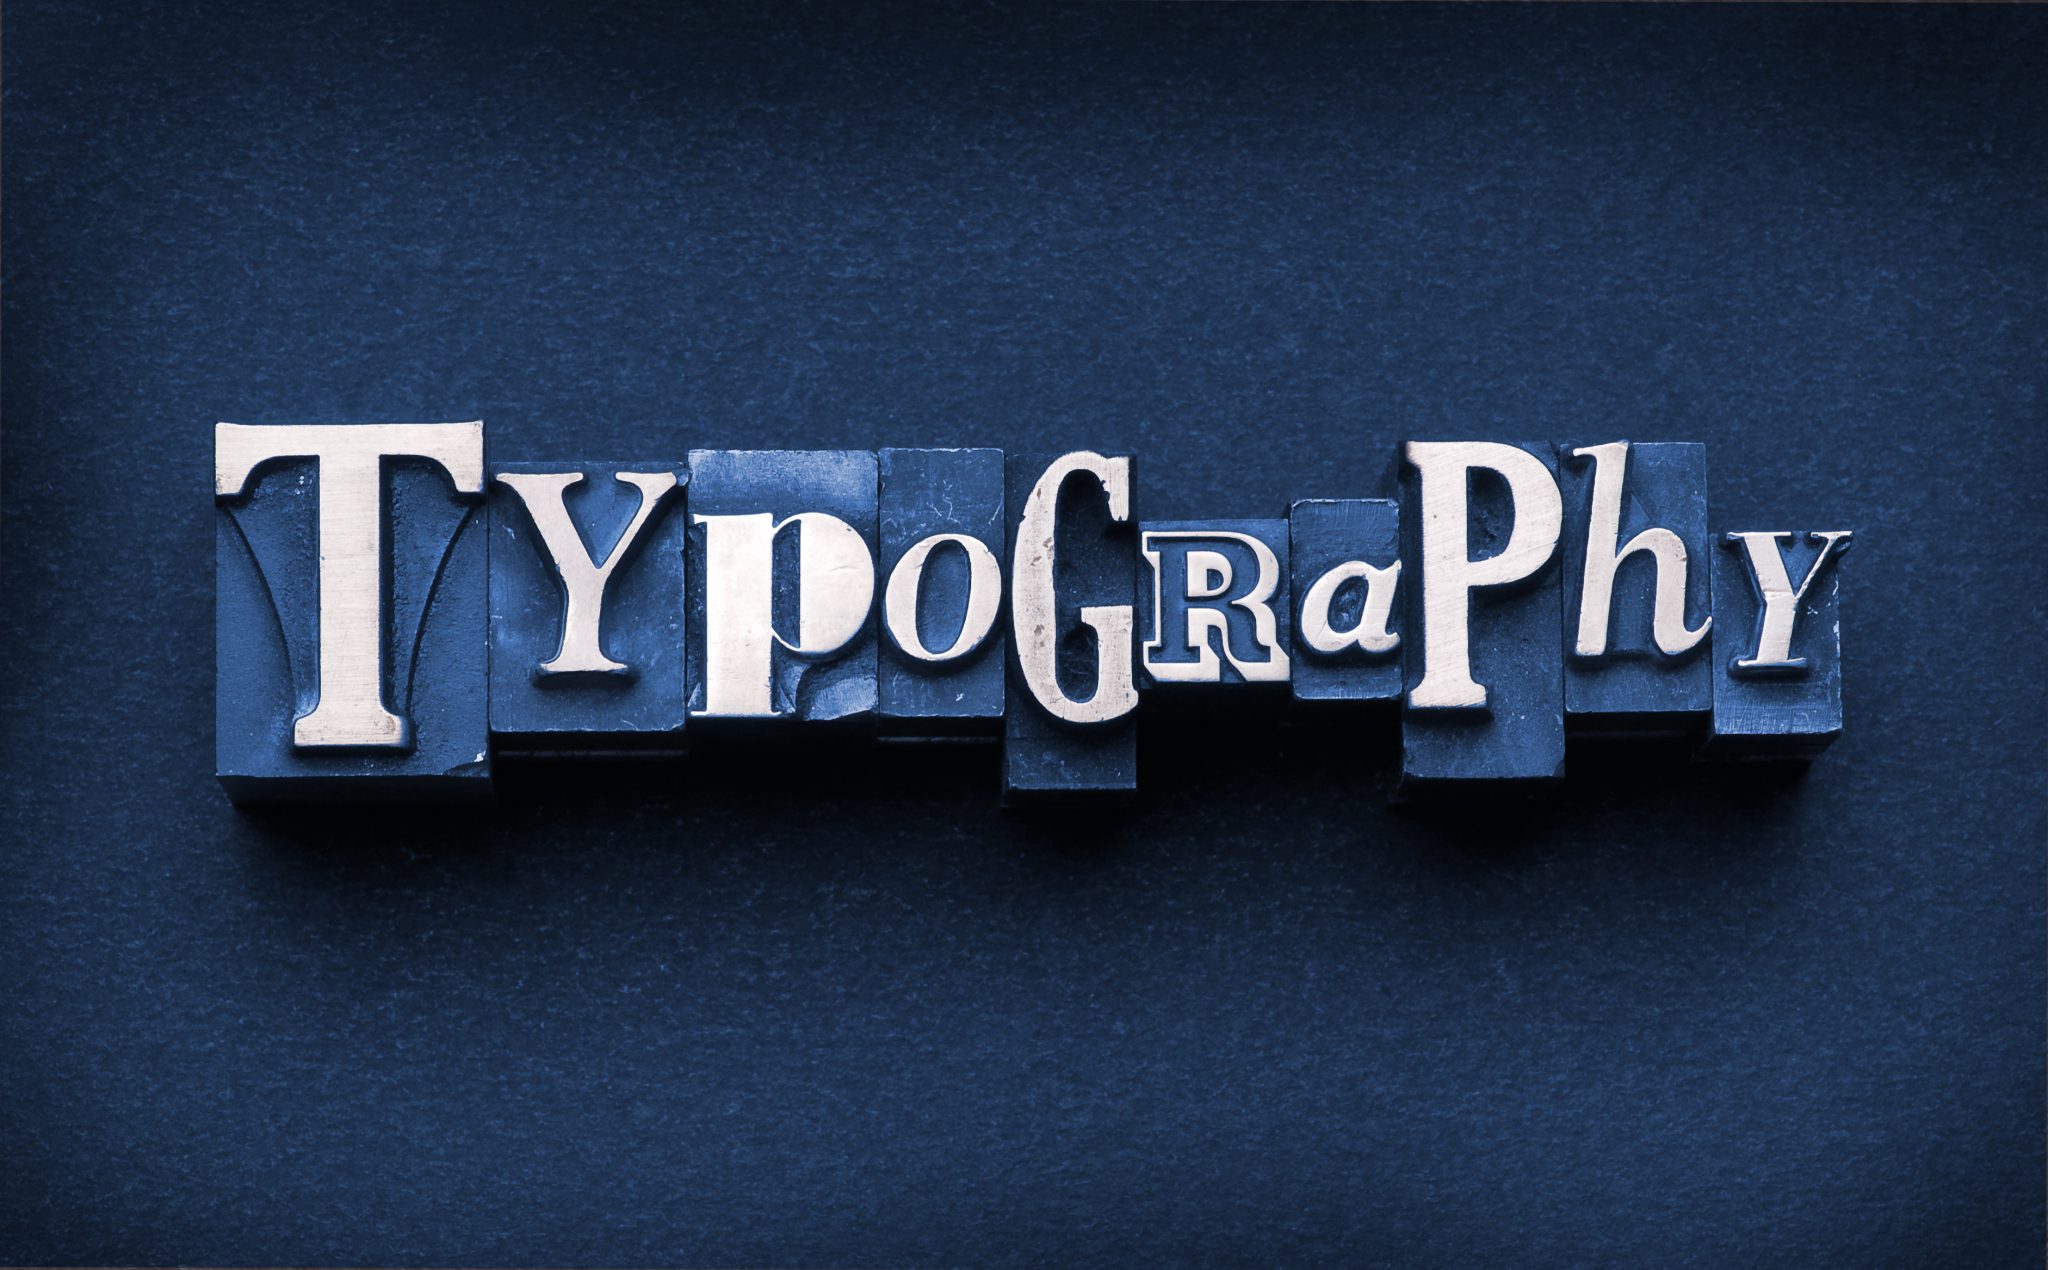 The word "Typography" done in letterpress type on a dark paper background and hand-tinted.